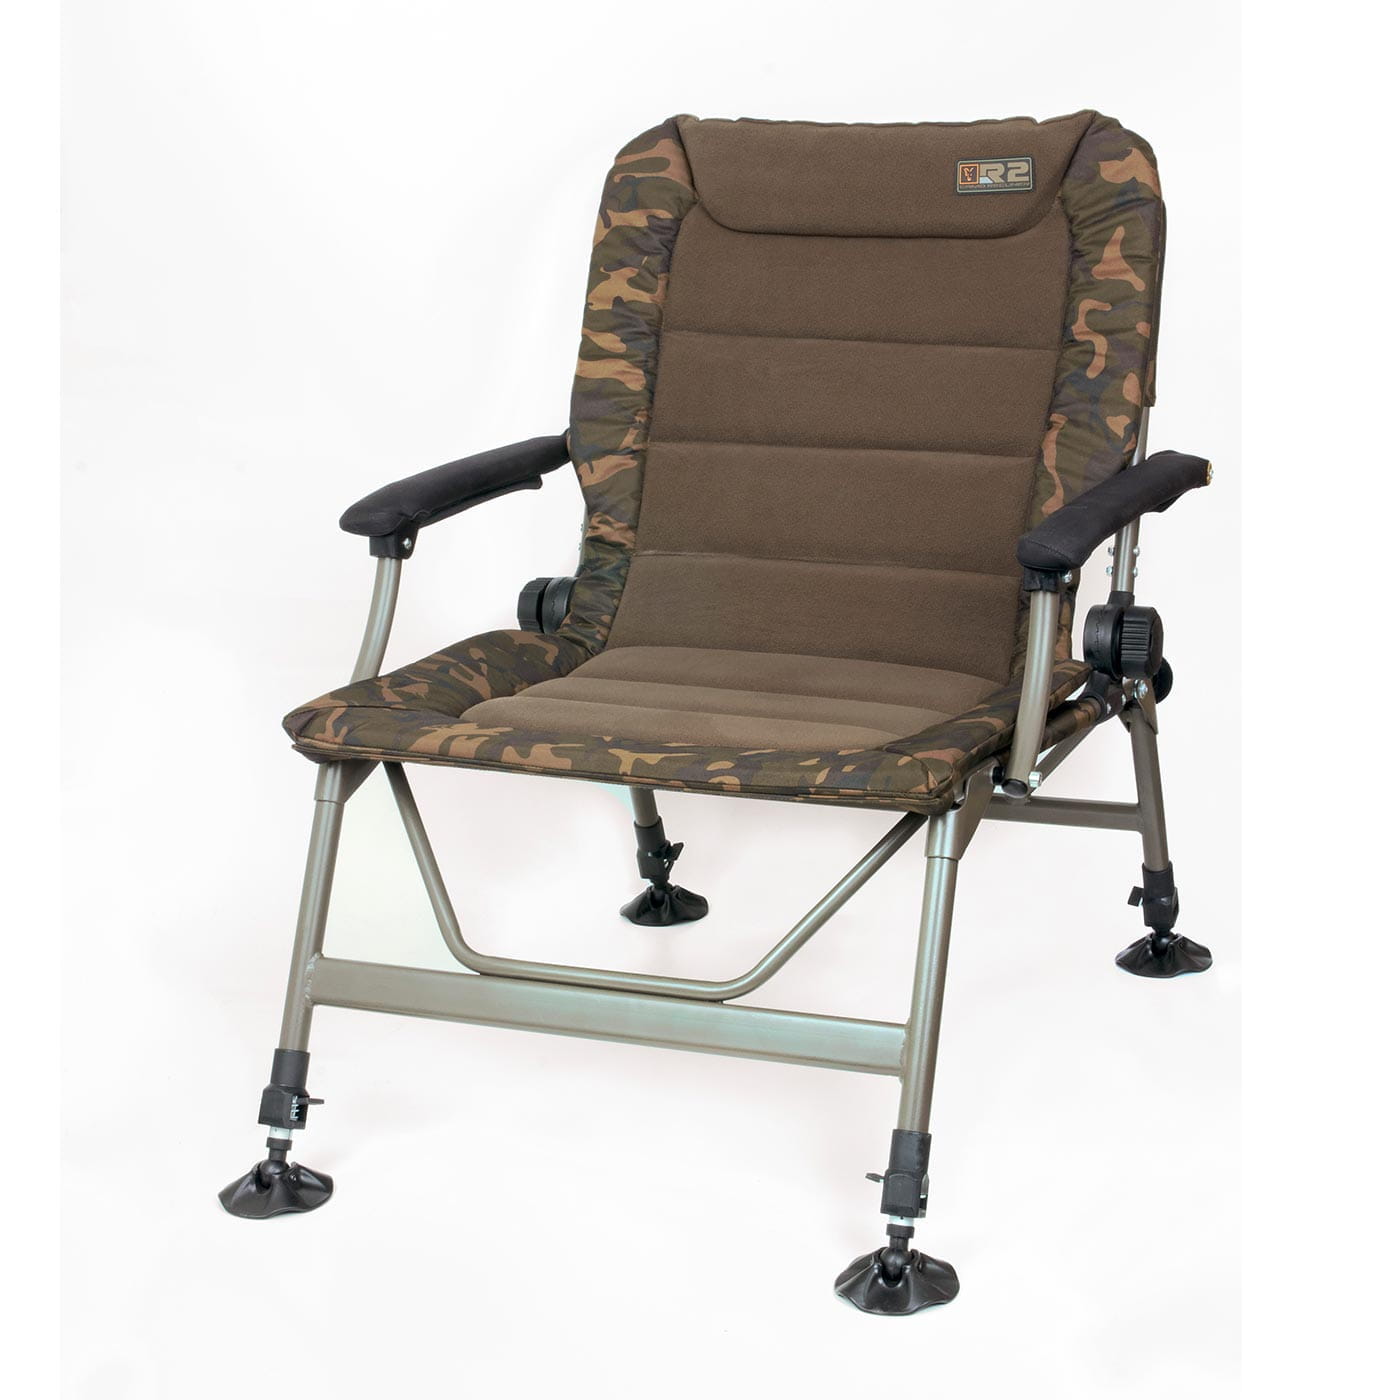 Fishing & Camping Chairs: Buy Online